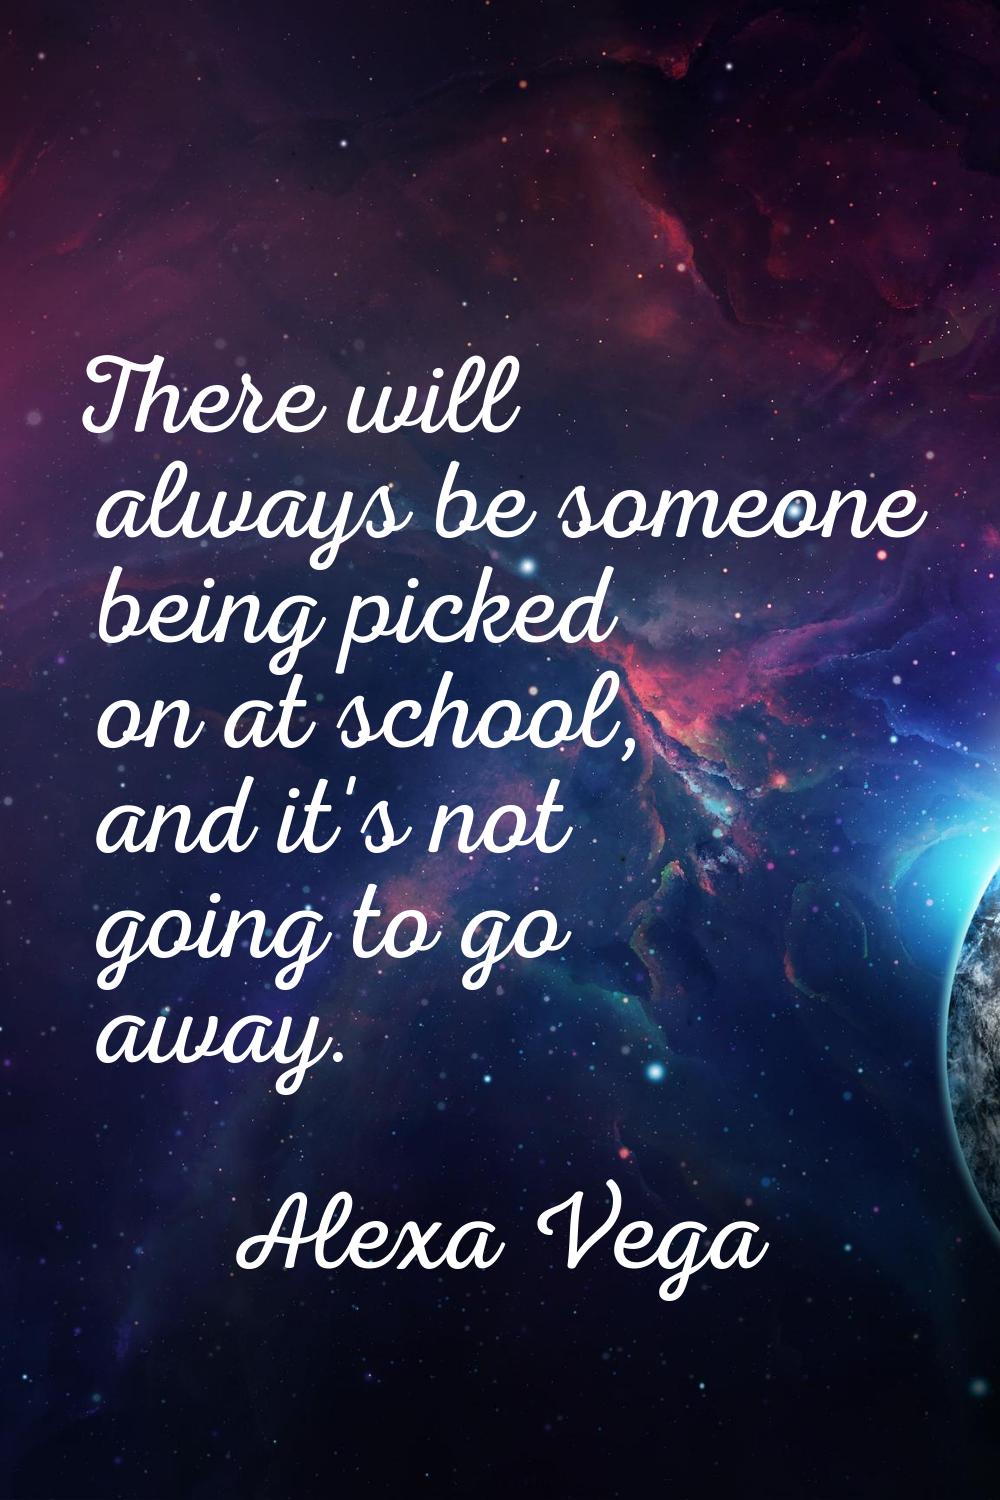 There will always be someone being picked on at school, and it's not going to go away.